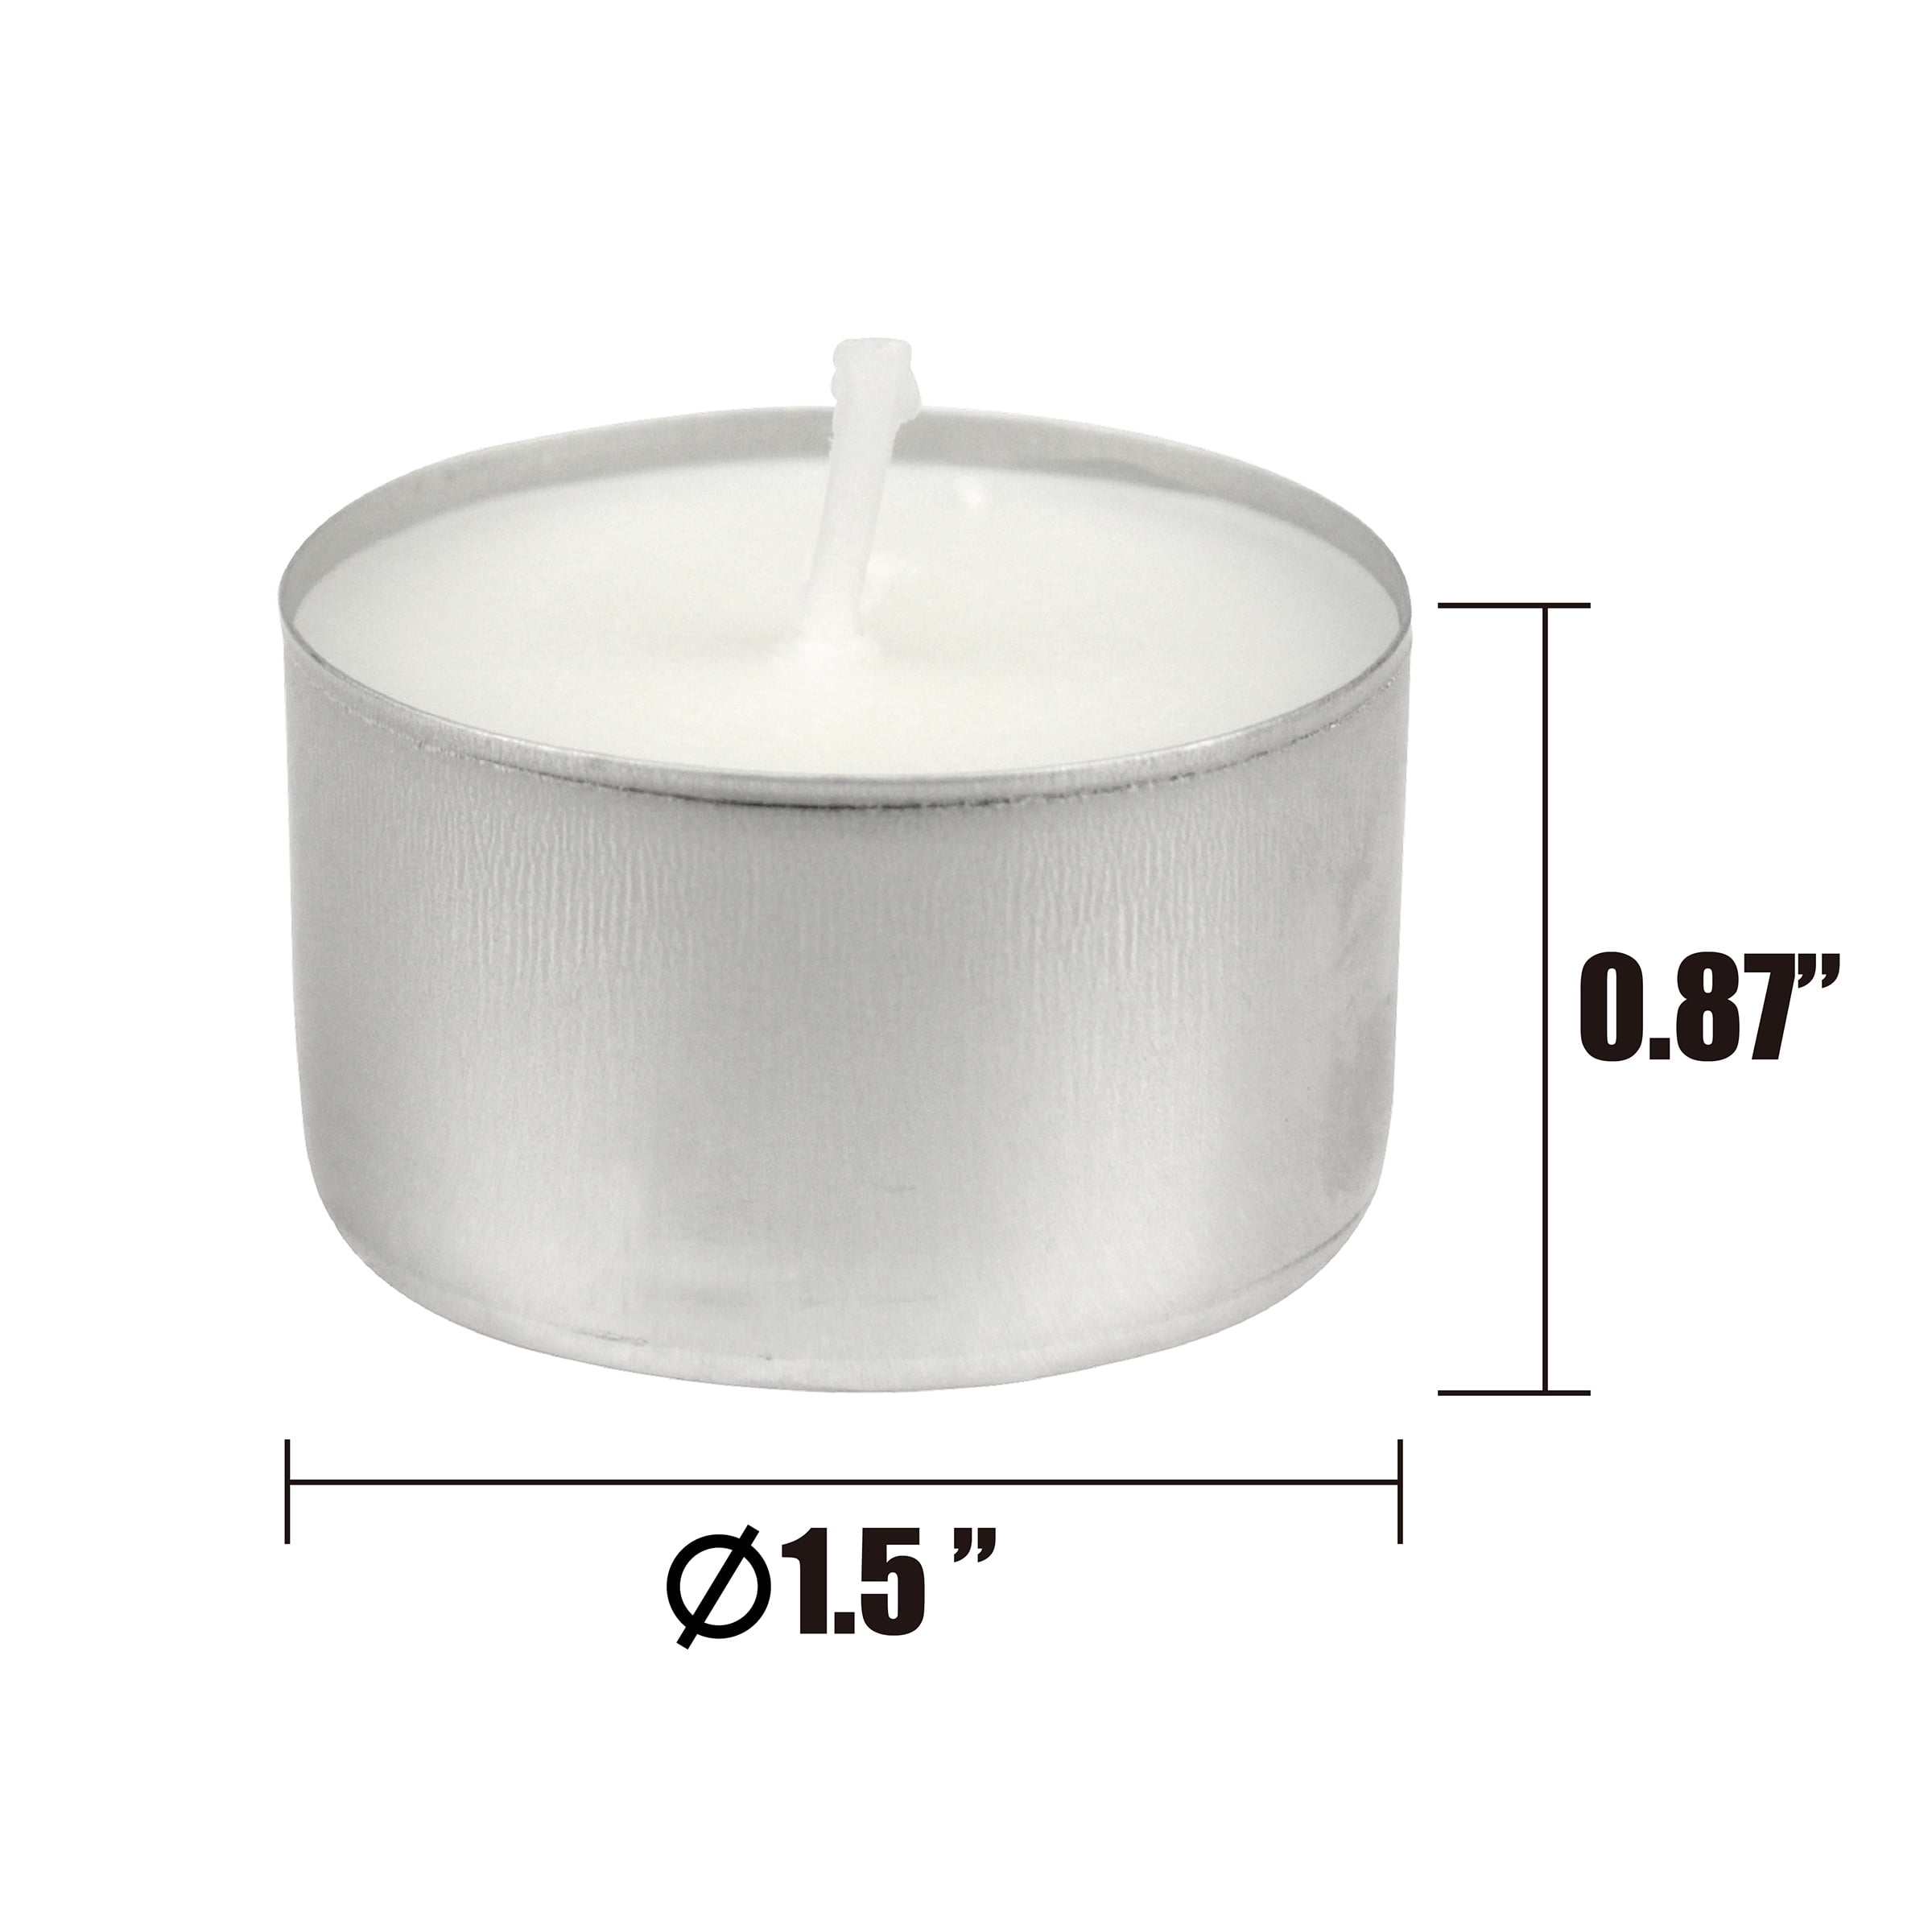 ARVO Tealight Candles White Unscented 6-8 Hour Burn Time Wax Candles Pack of 50 